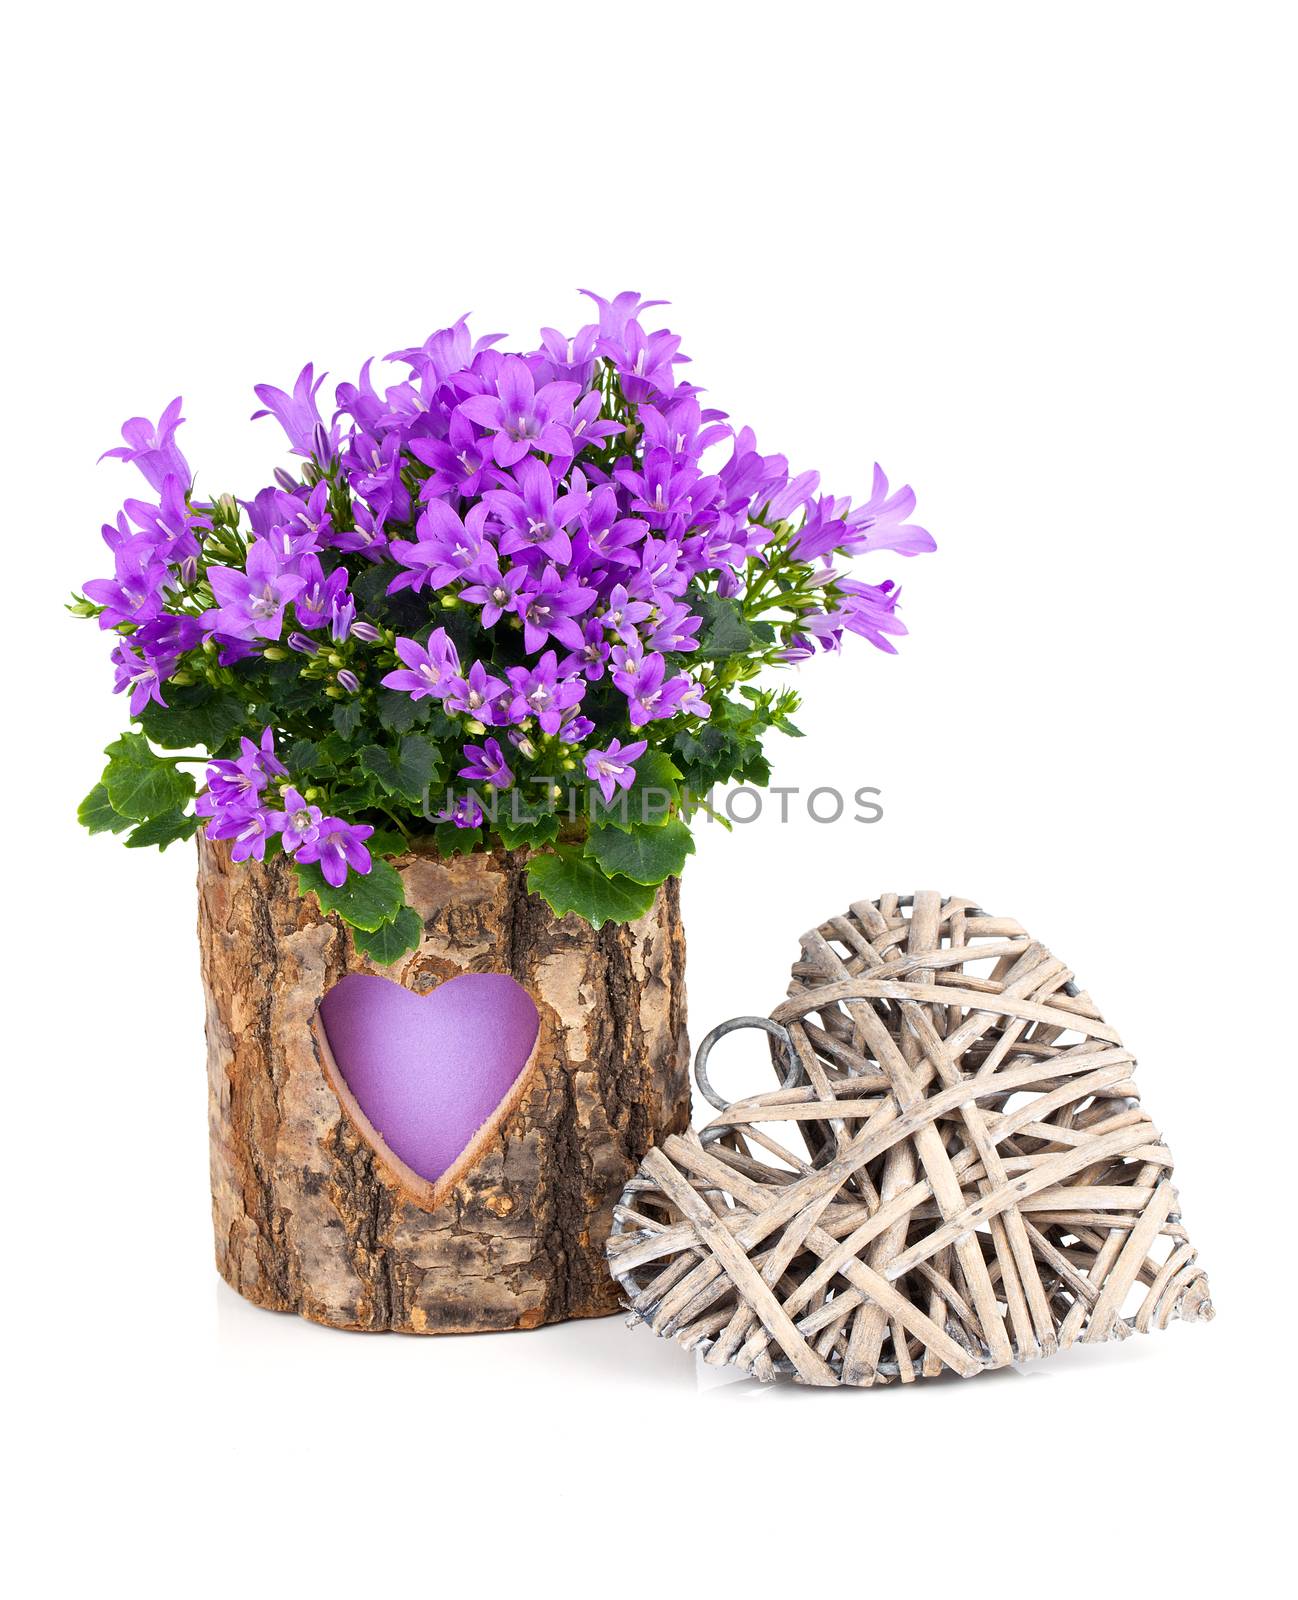 blue campanula flowers for Valentine's Day with wooden heart, on white background